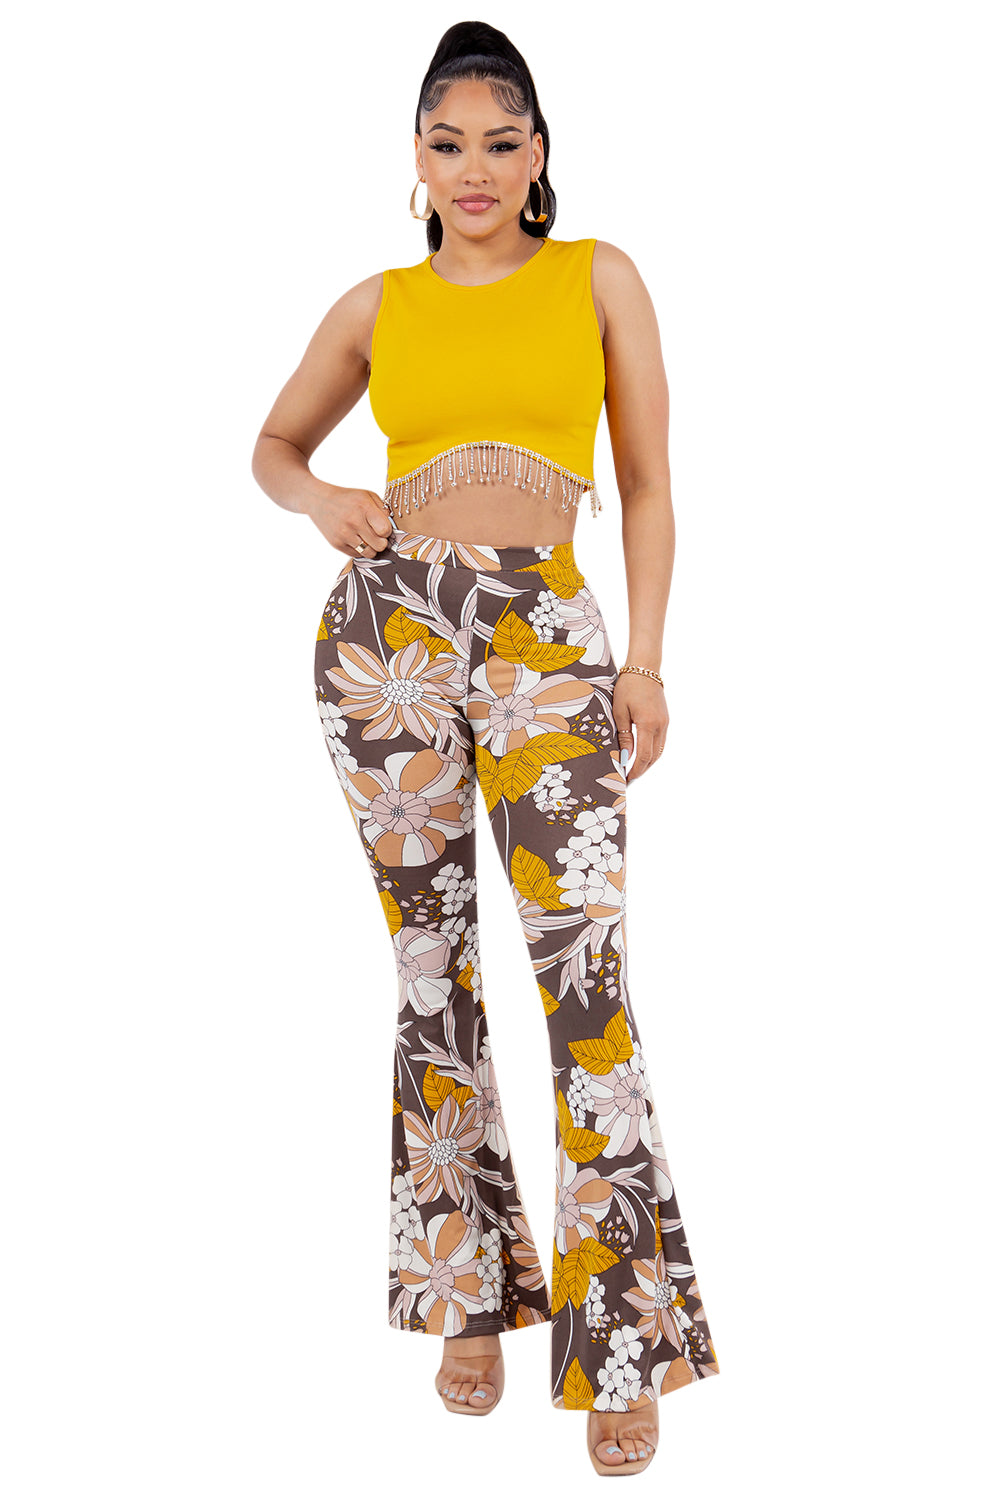 Women's Floral Print Stretchy Bell Bottom Flare Pants